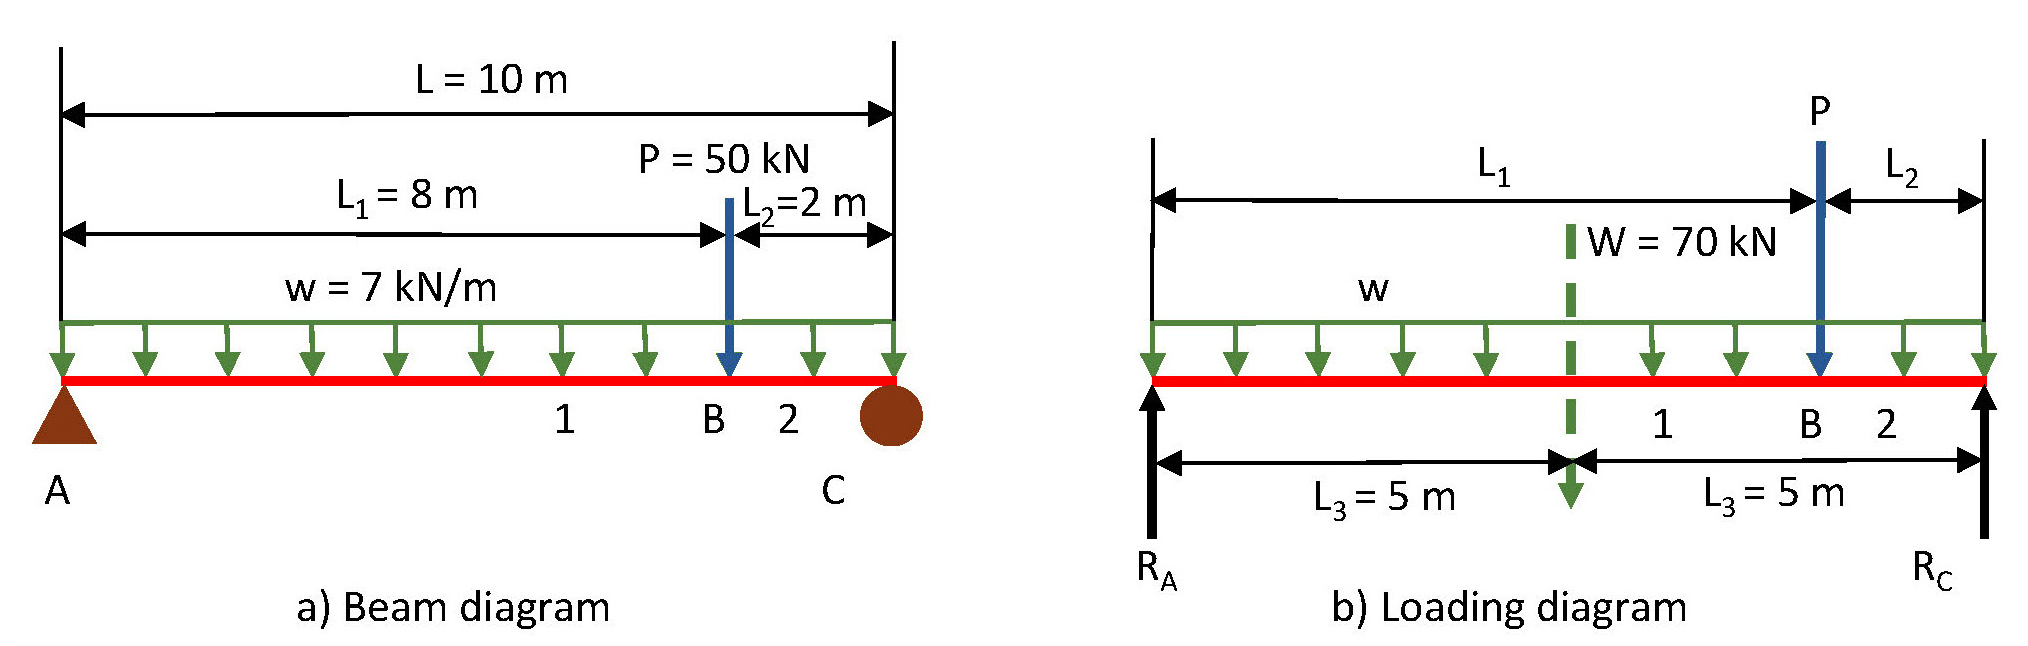 Beam and loading diagrams used to calculate the reactions RA and RC. 